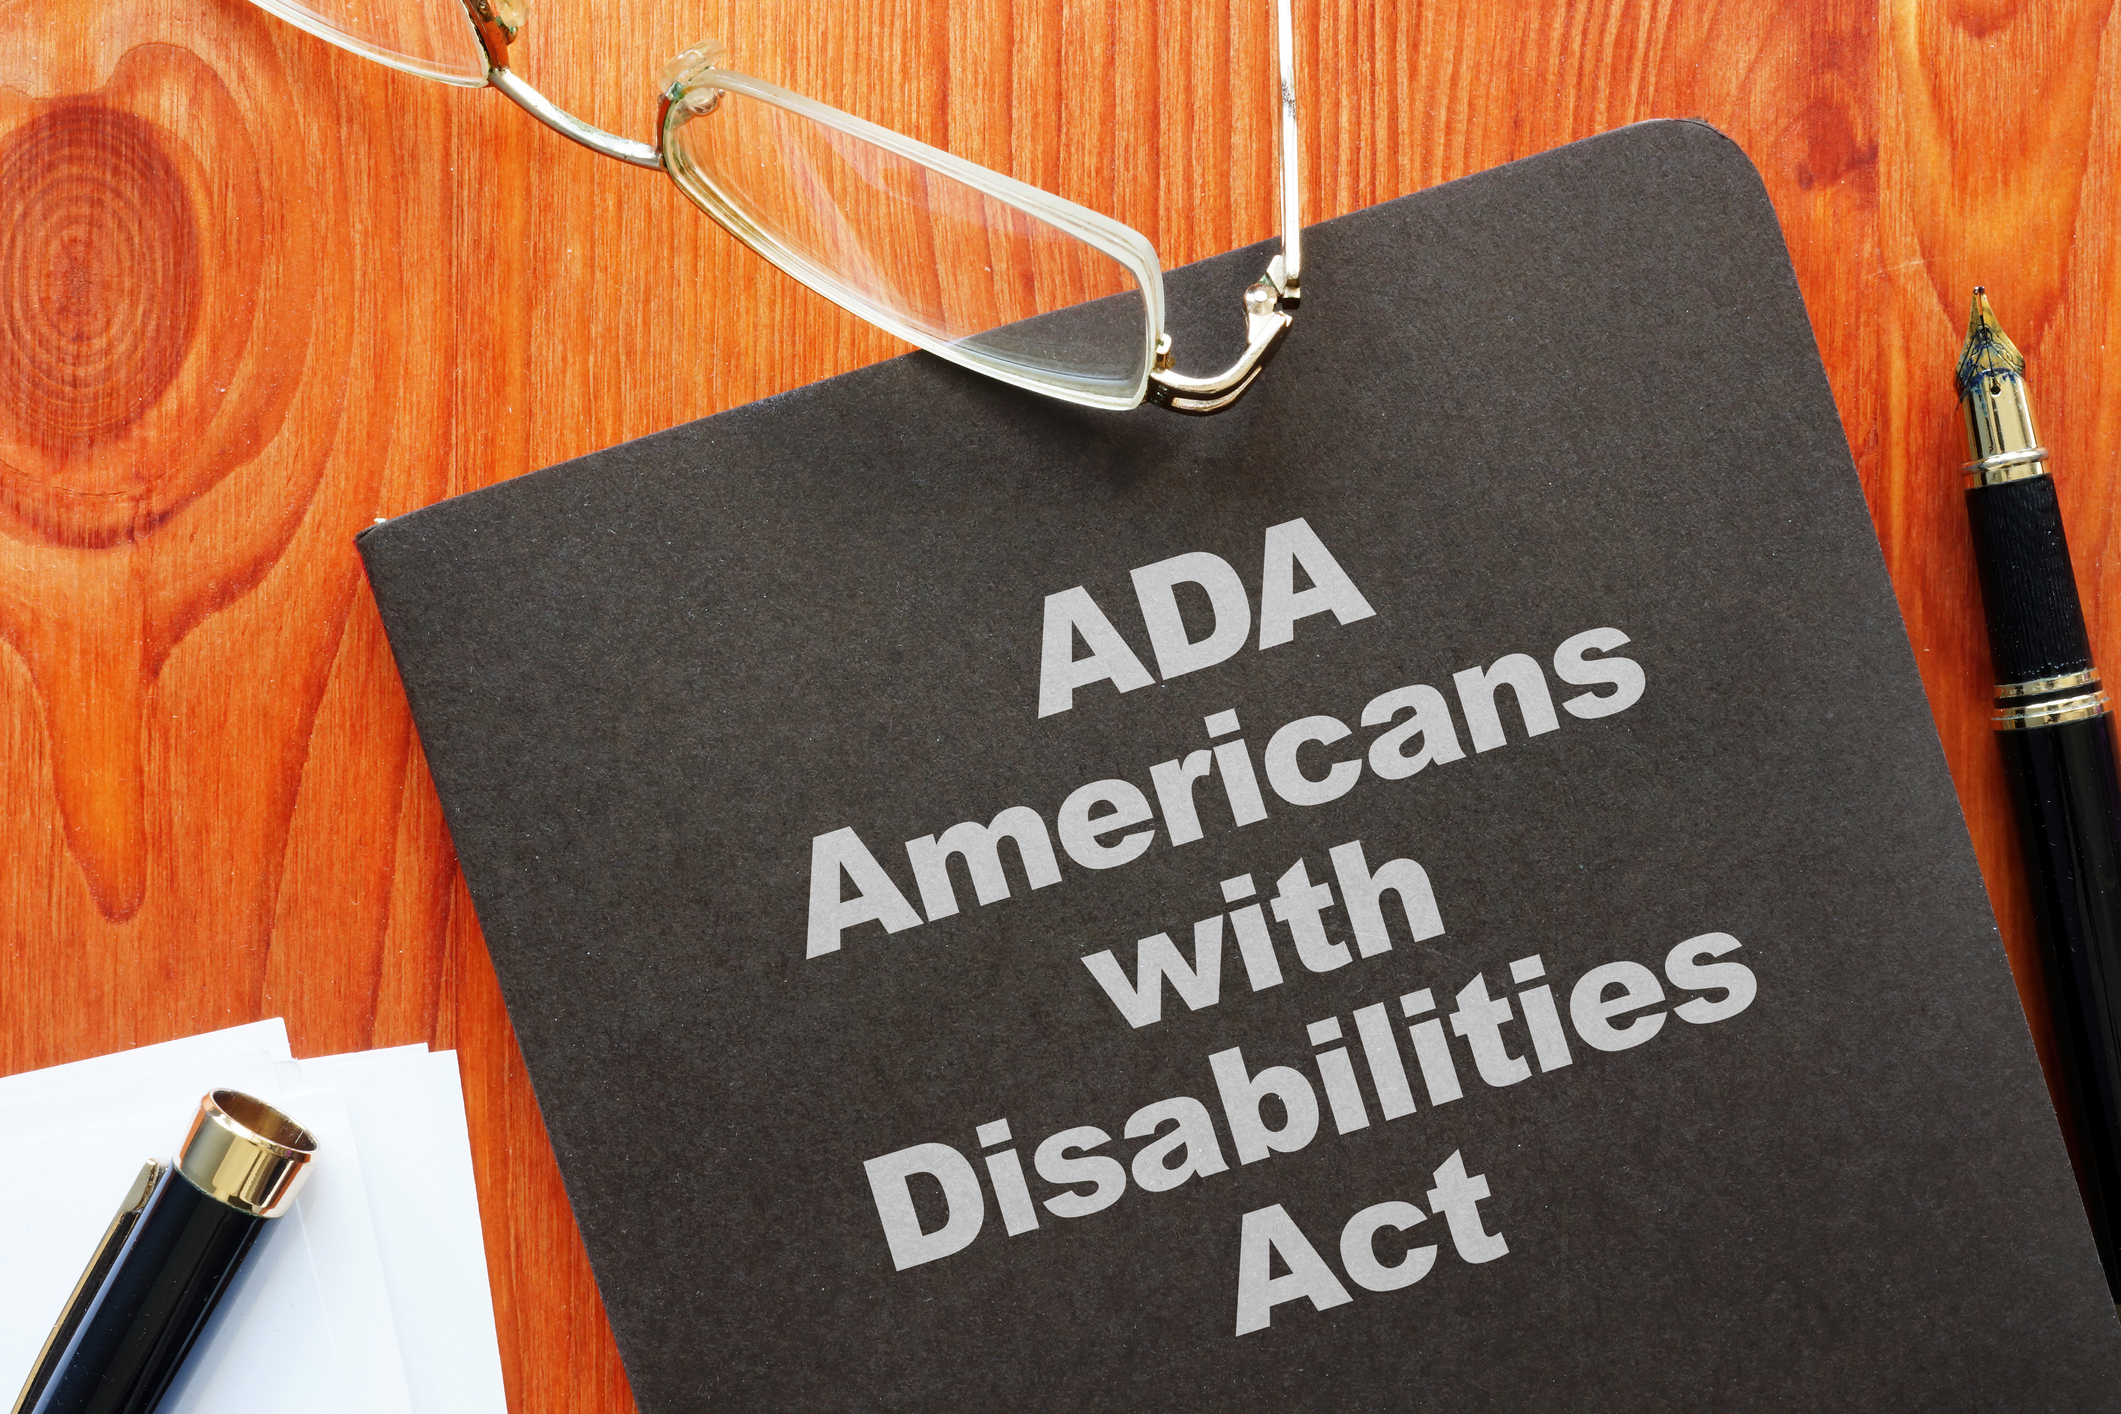 Book on a table with glasses. The text says Americans with Disabilities Act.